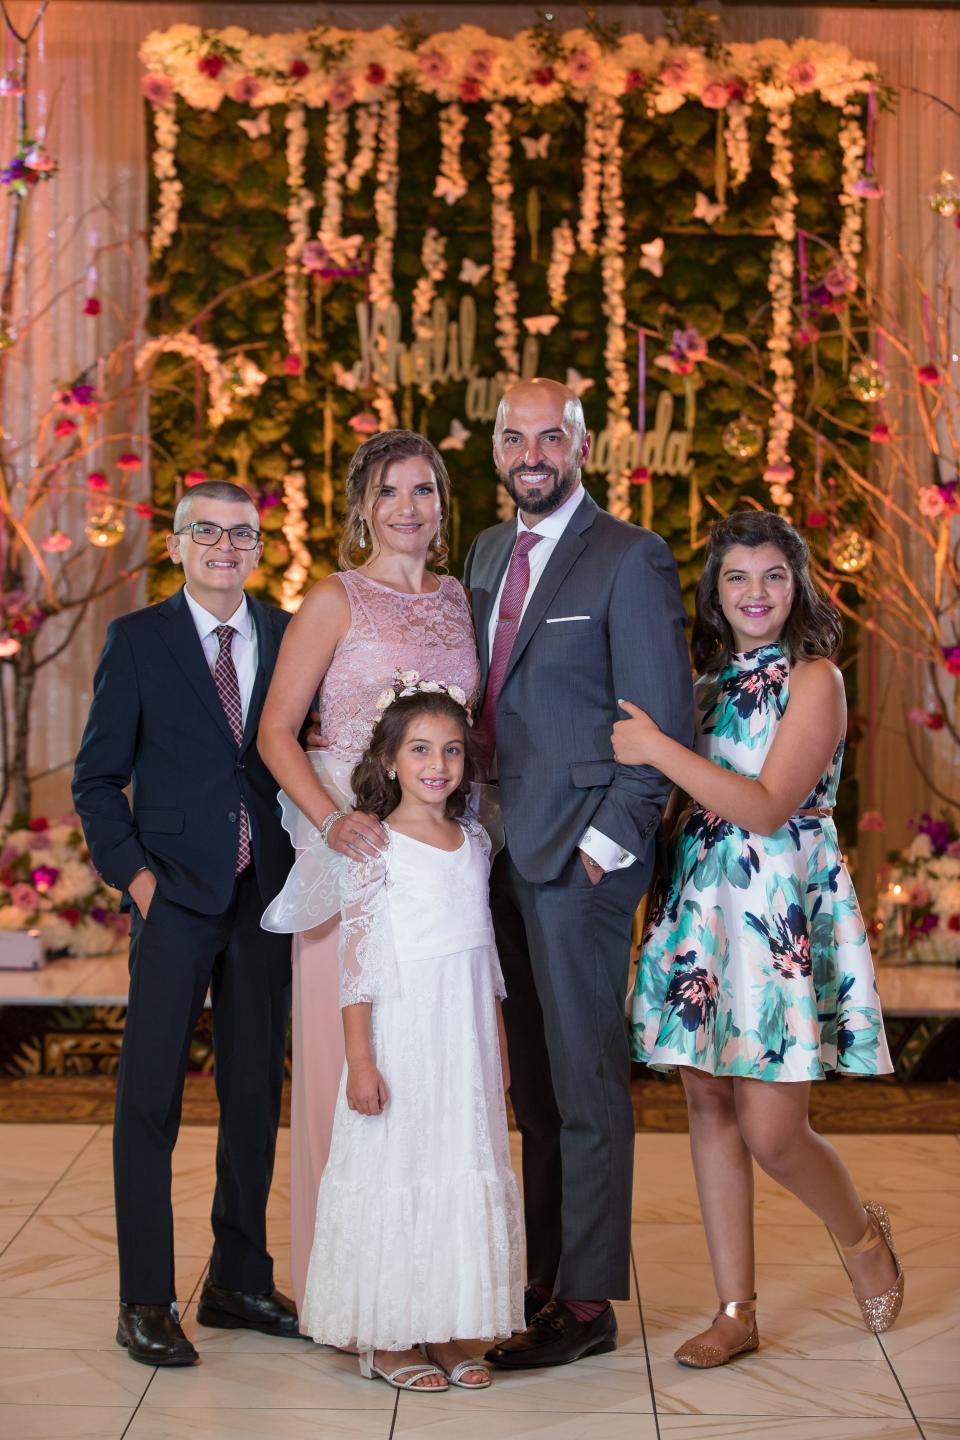 The Abbas family, clockwise from left, Ali, Rima, Issam, Isabelle and Giselle, pose for a photo at a wedding in 2018.